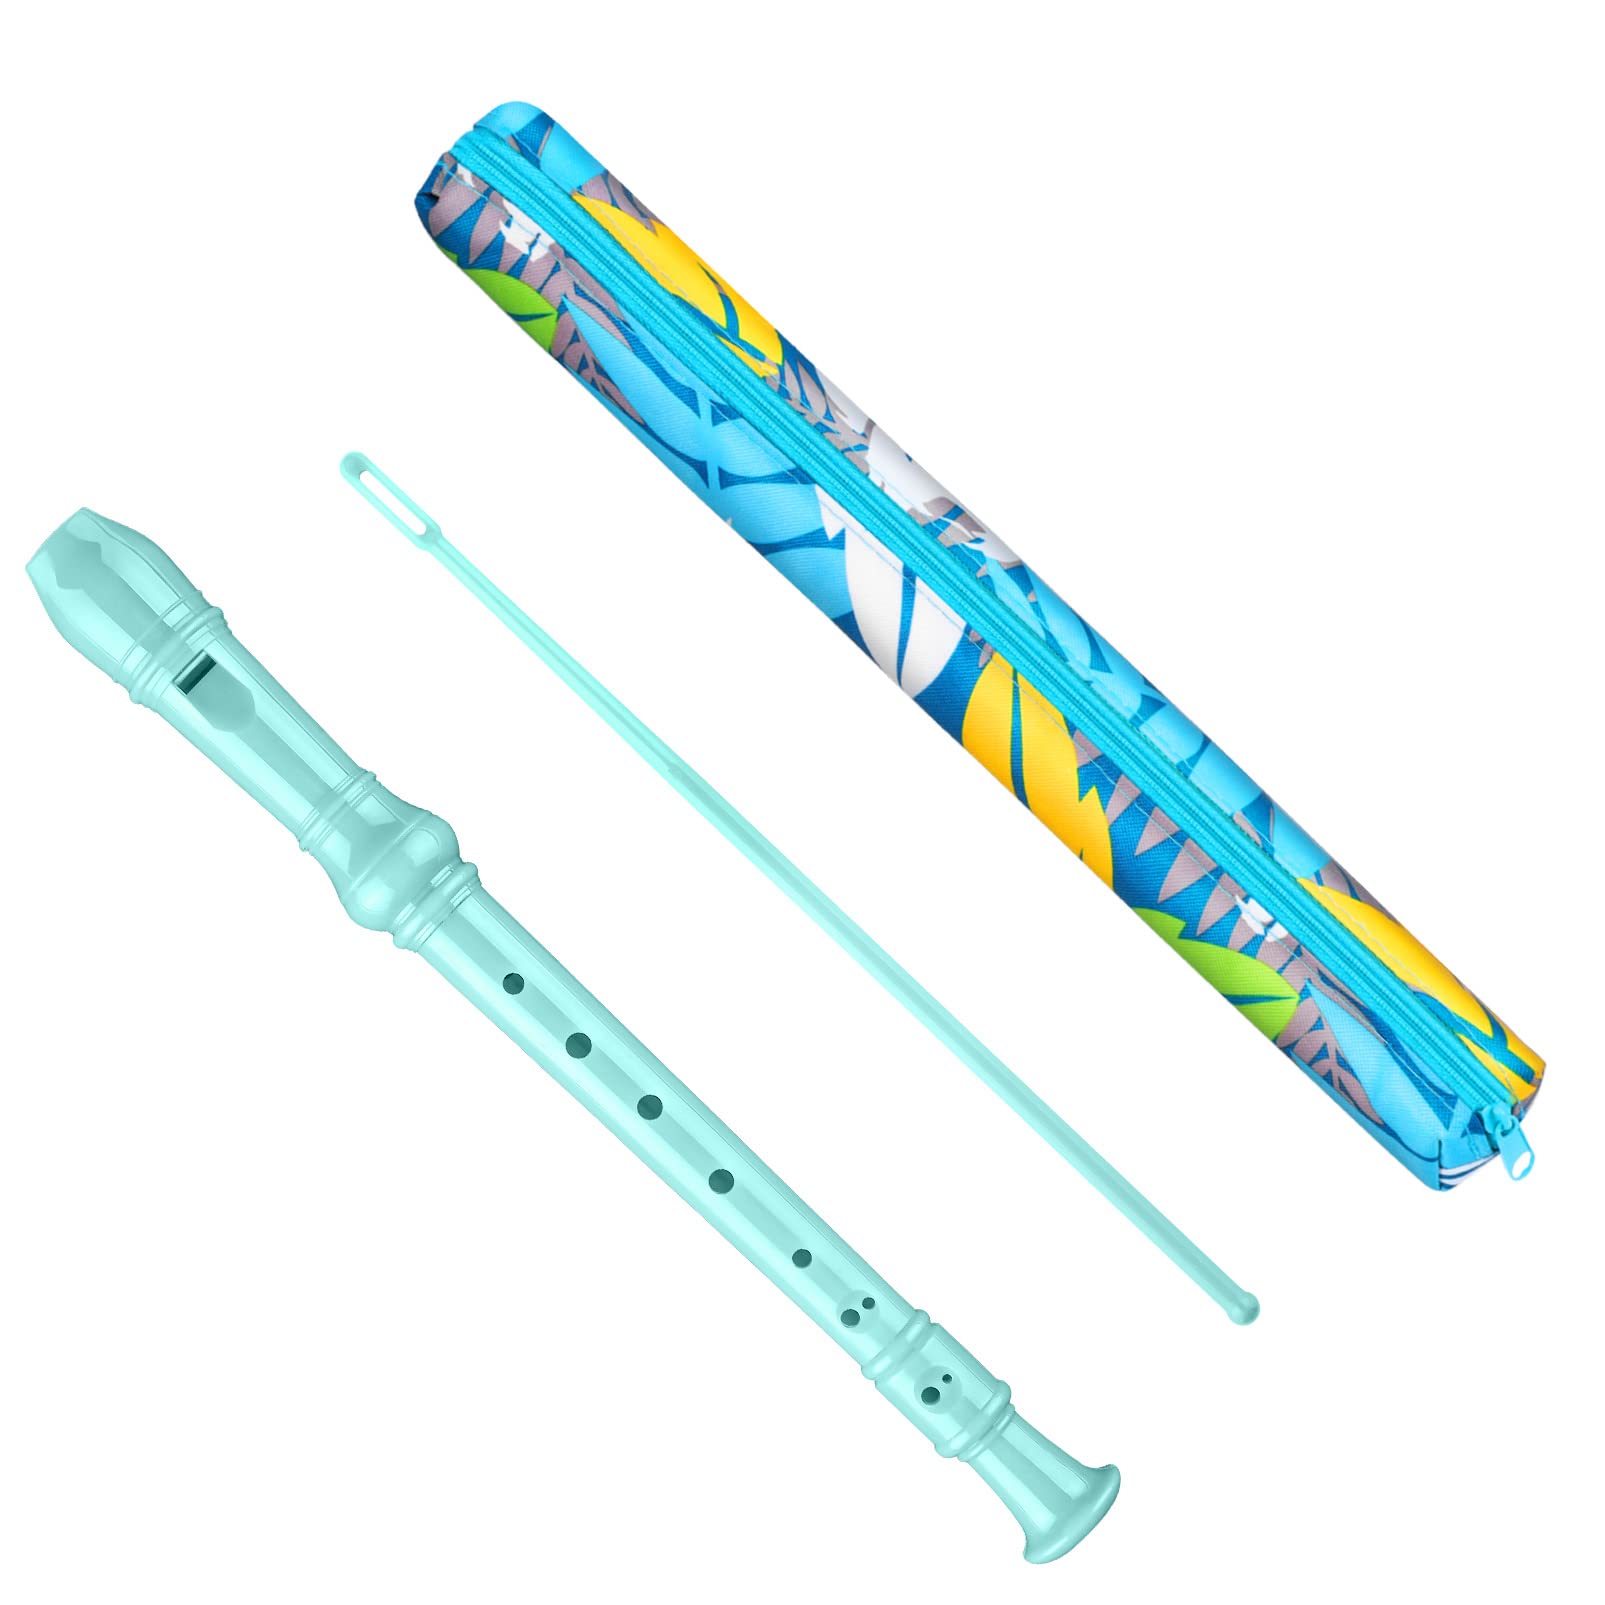 Yop-yes Descant Soprano Recorder Music Recorder Instrument For Kids Flute Kids Recorder With Cleaning Rod + Case Bag (Lake Green)